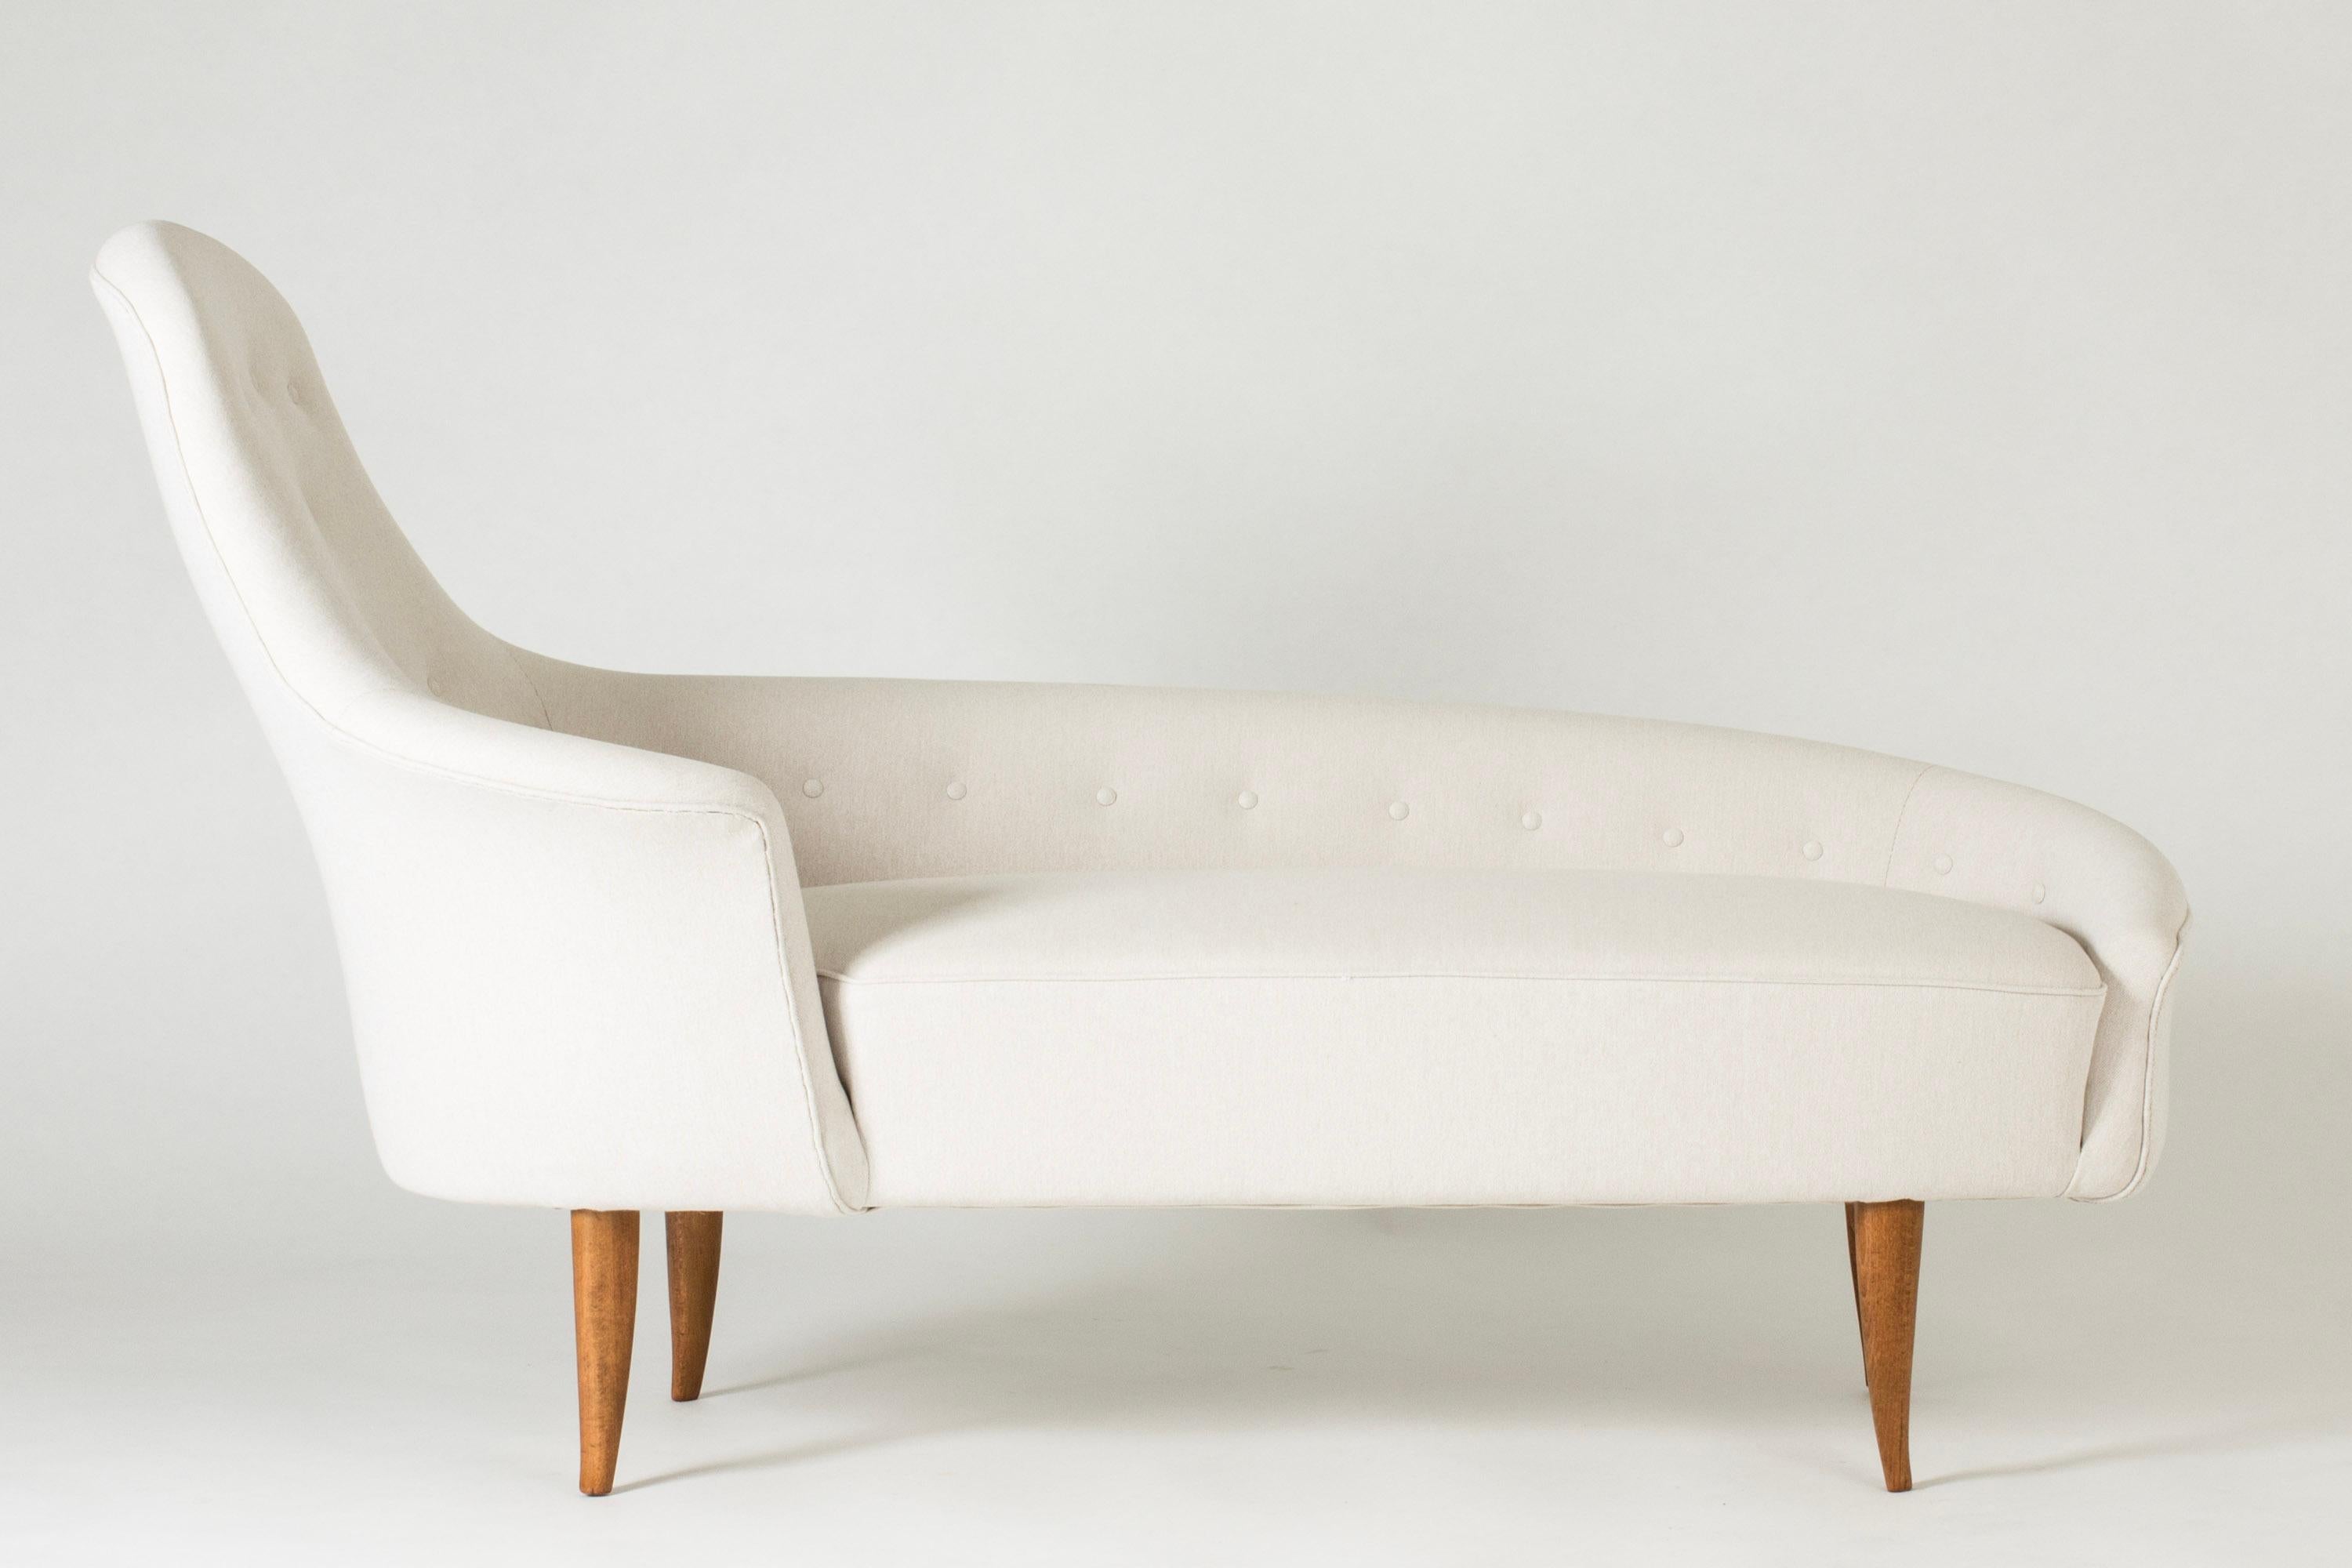 Stunning “Garden of Eden” settee by Kerstin Hörlin-Holmquist, upholstered in eggshell white linen. Beautiful design that strikes a perfect balance between modernism and tradition.

Kerstin Hörlin-Holmquist was one of the first female designers to be